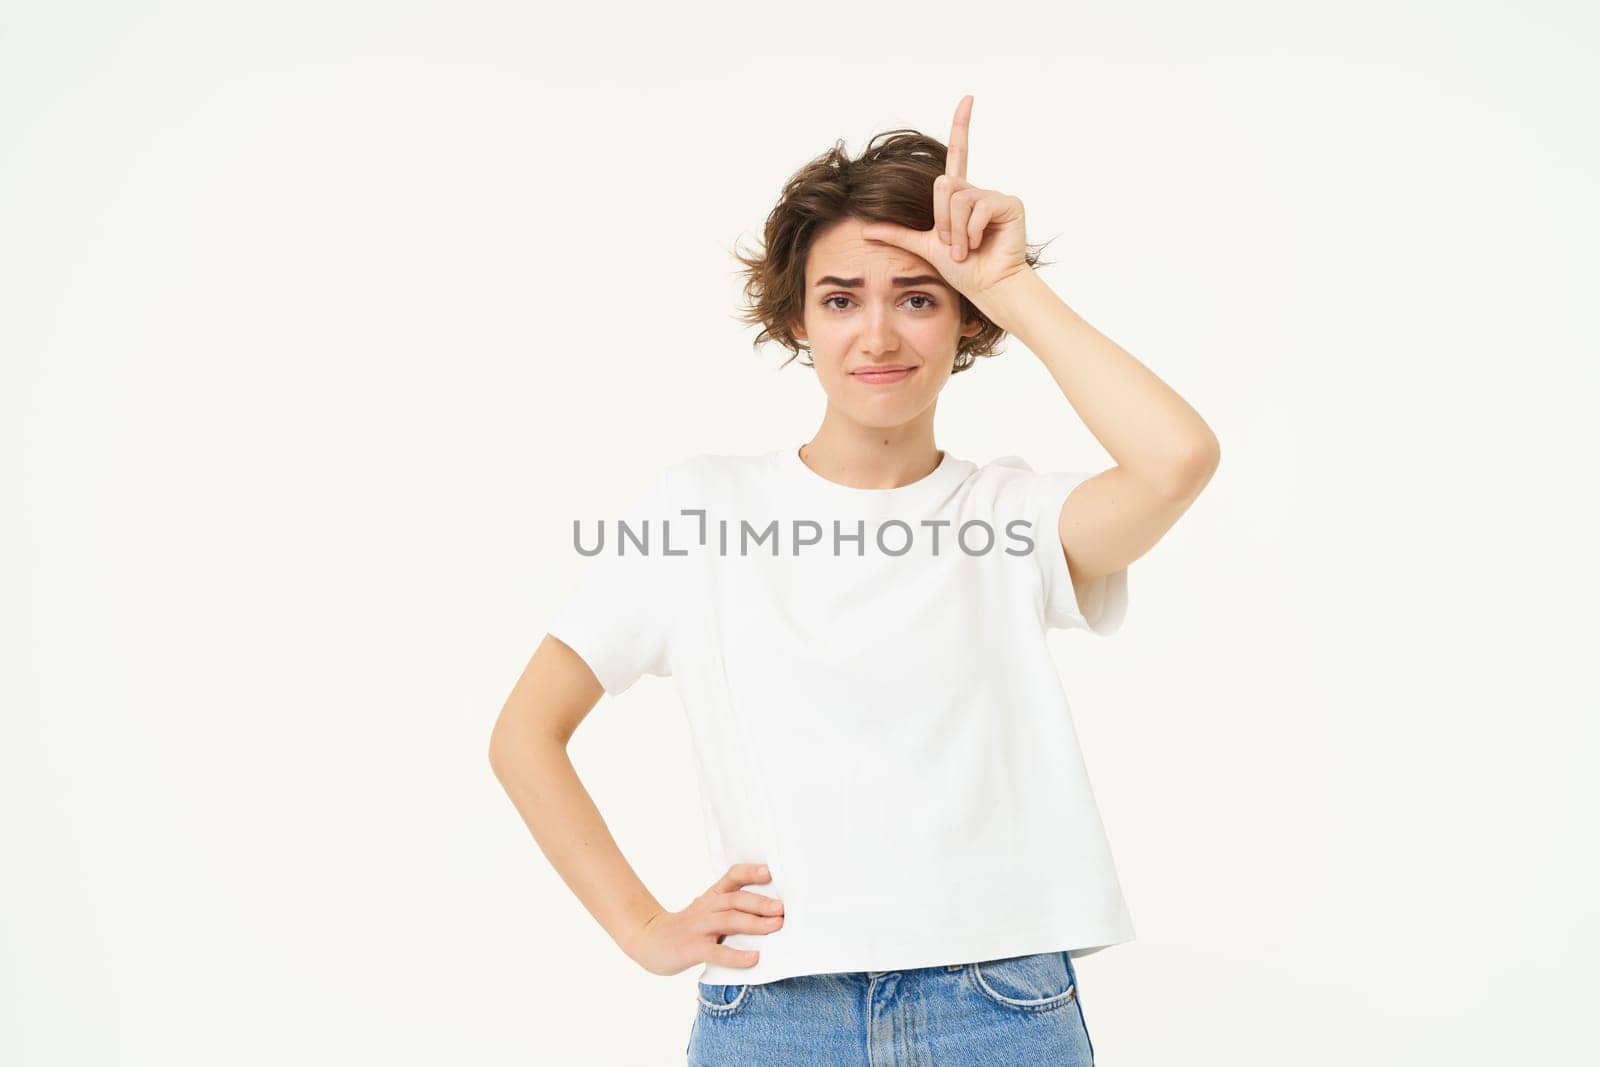 Portrait of arrogant young female model, shows loser, l letter on forehead, stands over white background.